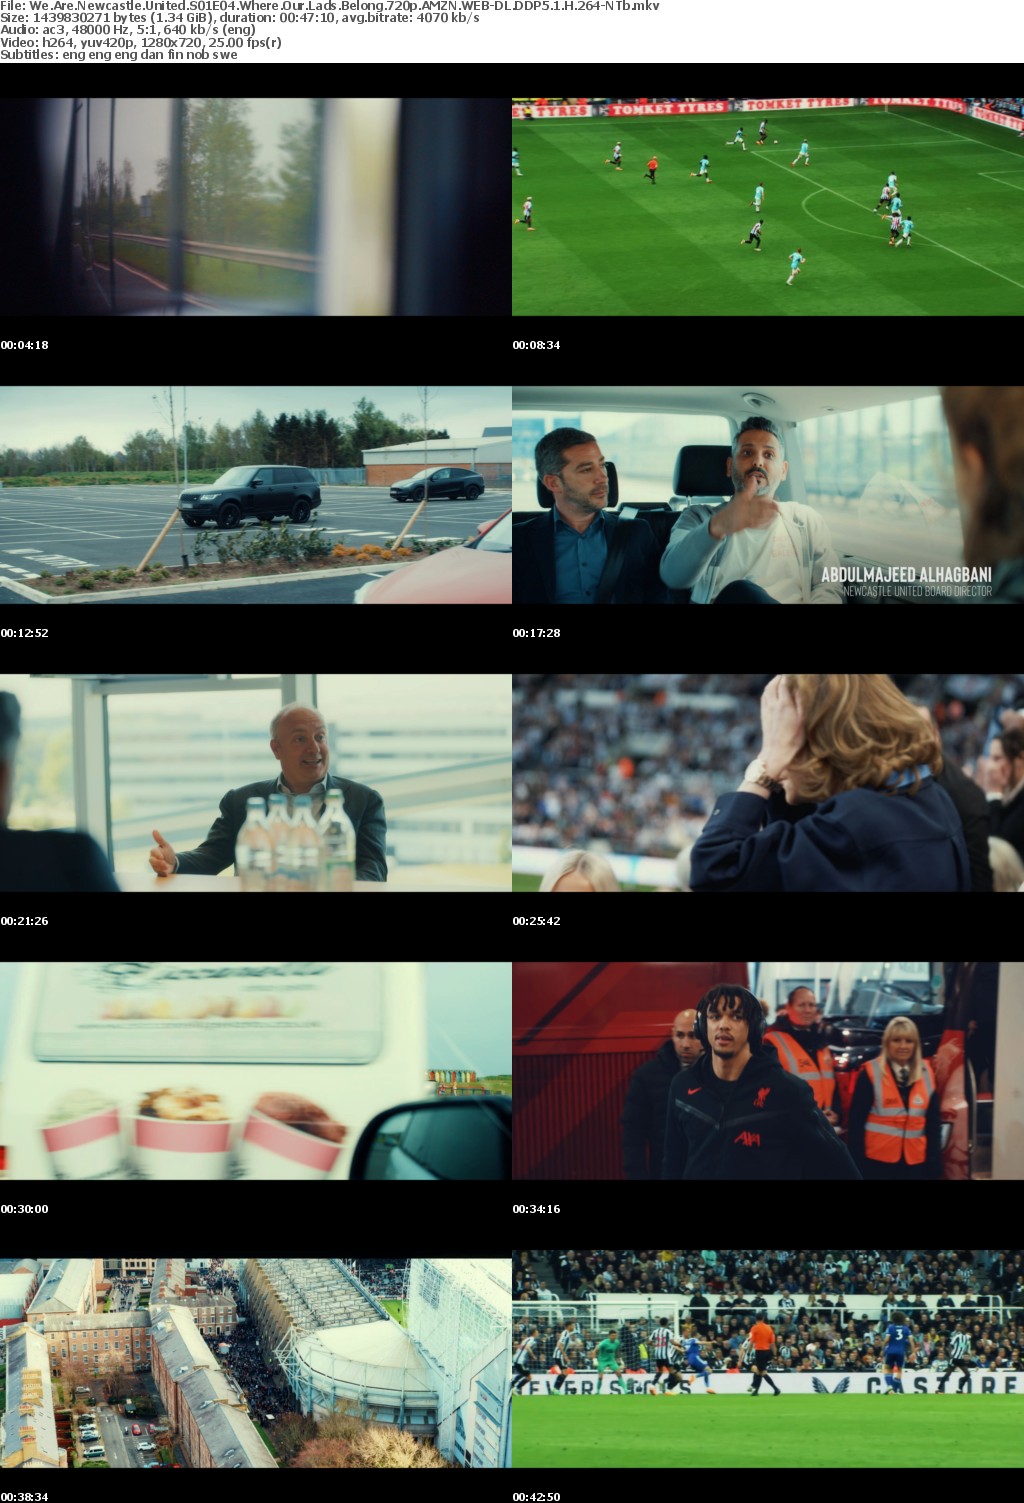 We Are Newcastle United S01E04 Where Our Lads Belong 720p AMZN WEB-DL DDP5 1 H 264-NTb